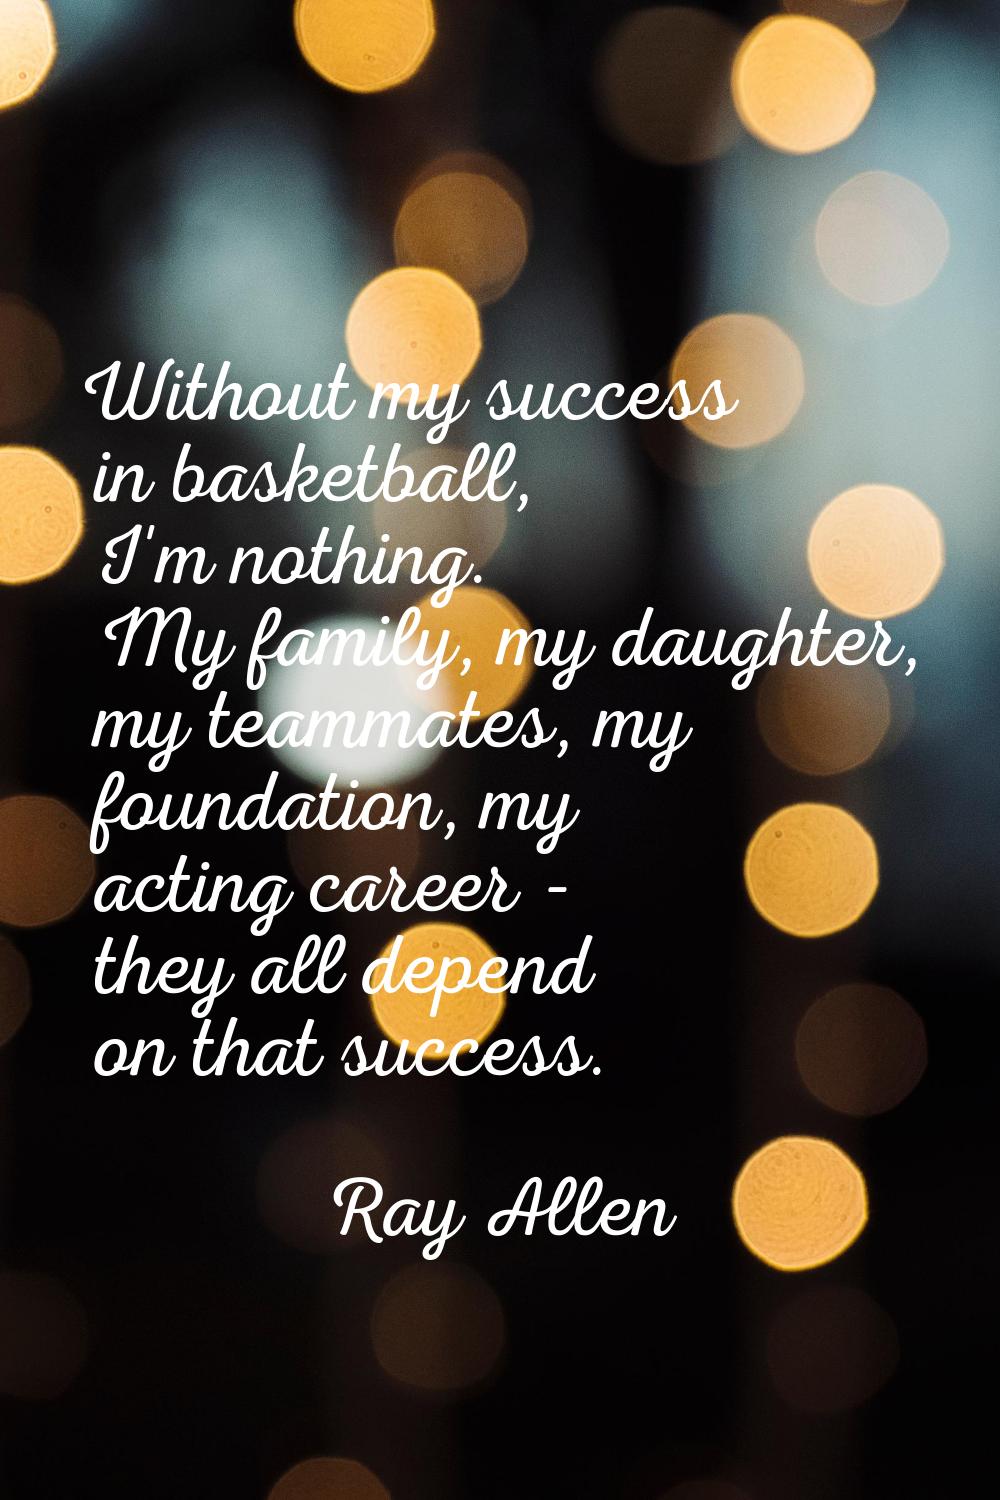 Without my success in basketball, I'm nothing. My family, my daughter, my teammates, my foundation,